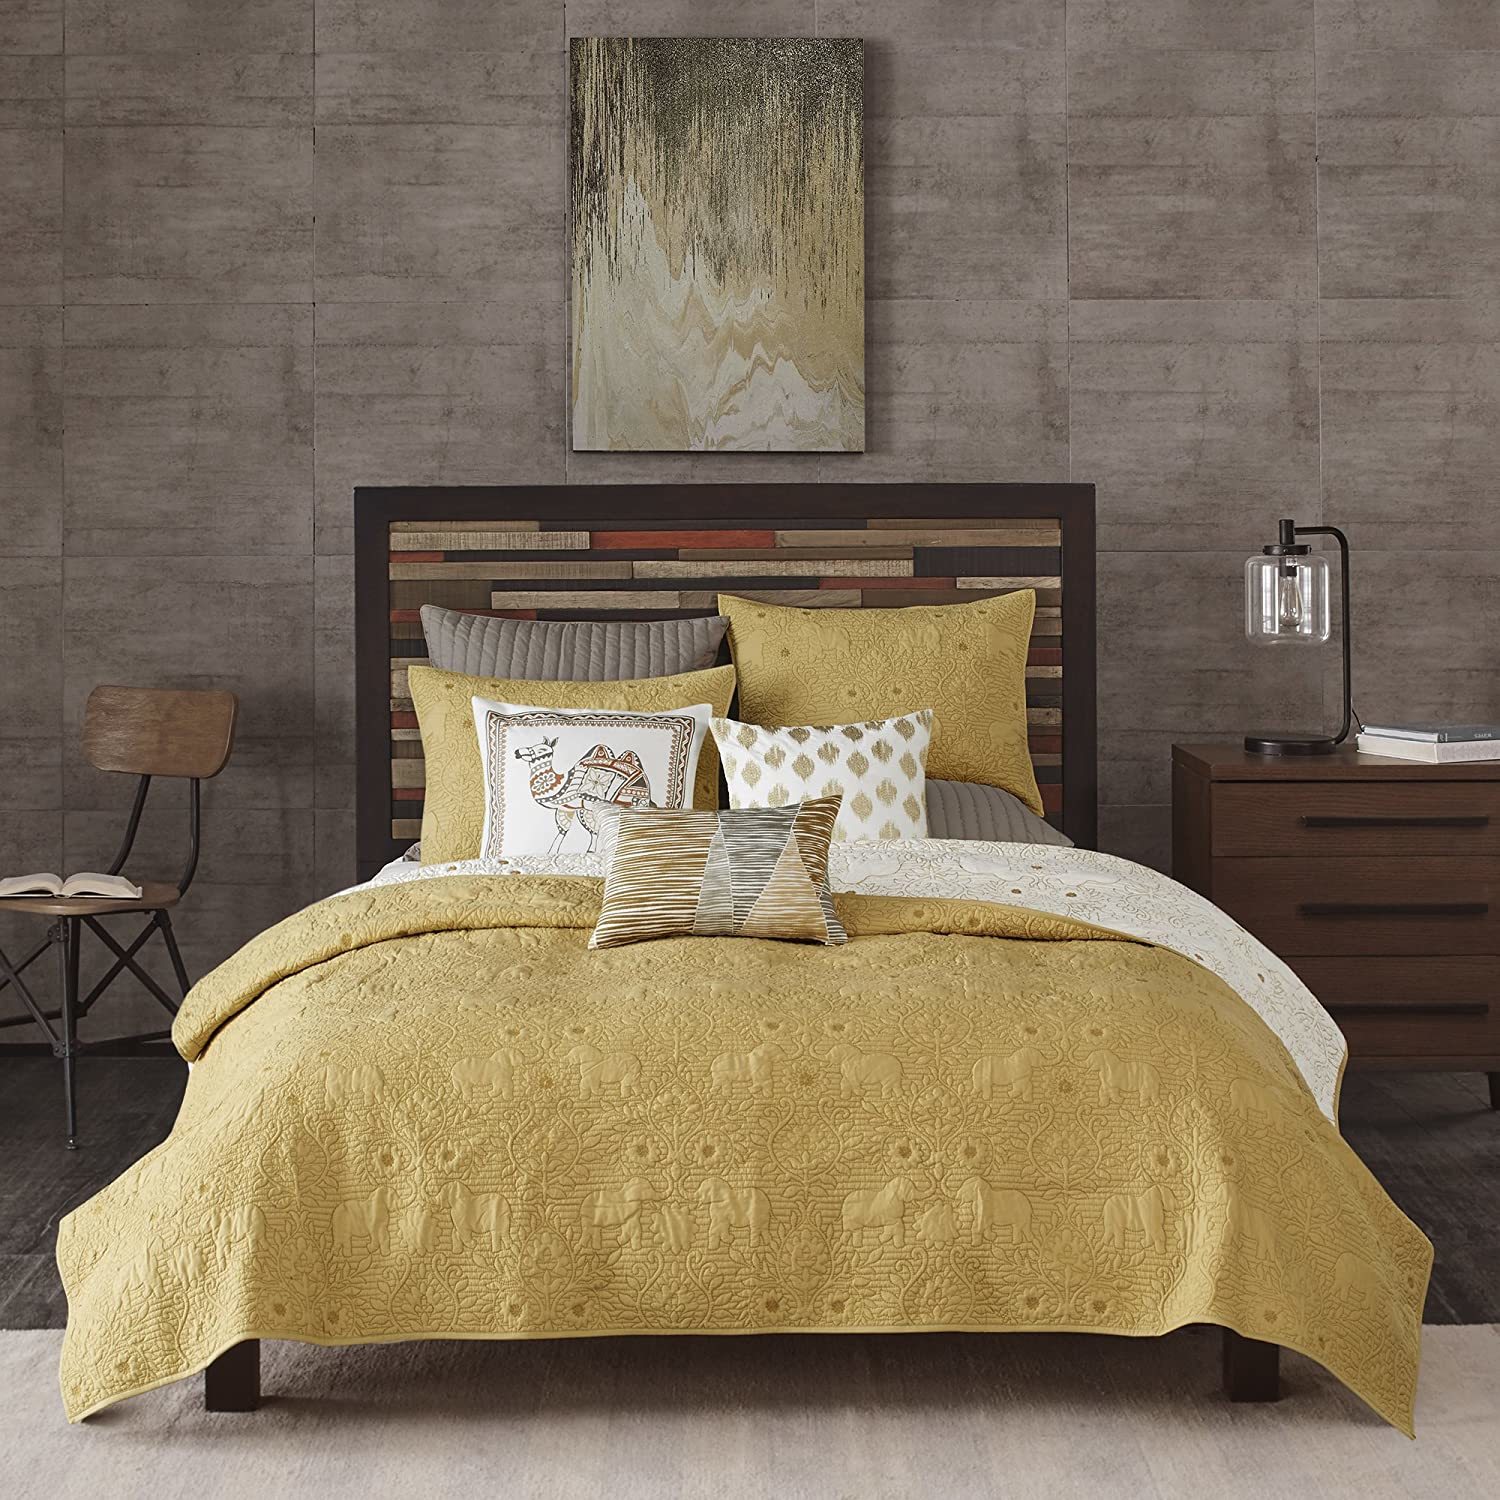 Primary image for Ink Ivy Kandula Full/Queen Size Quilt Bedding Set - Mustard Yellow, Quilted